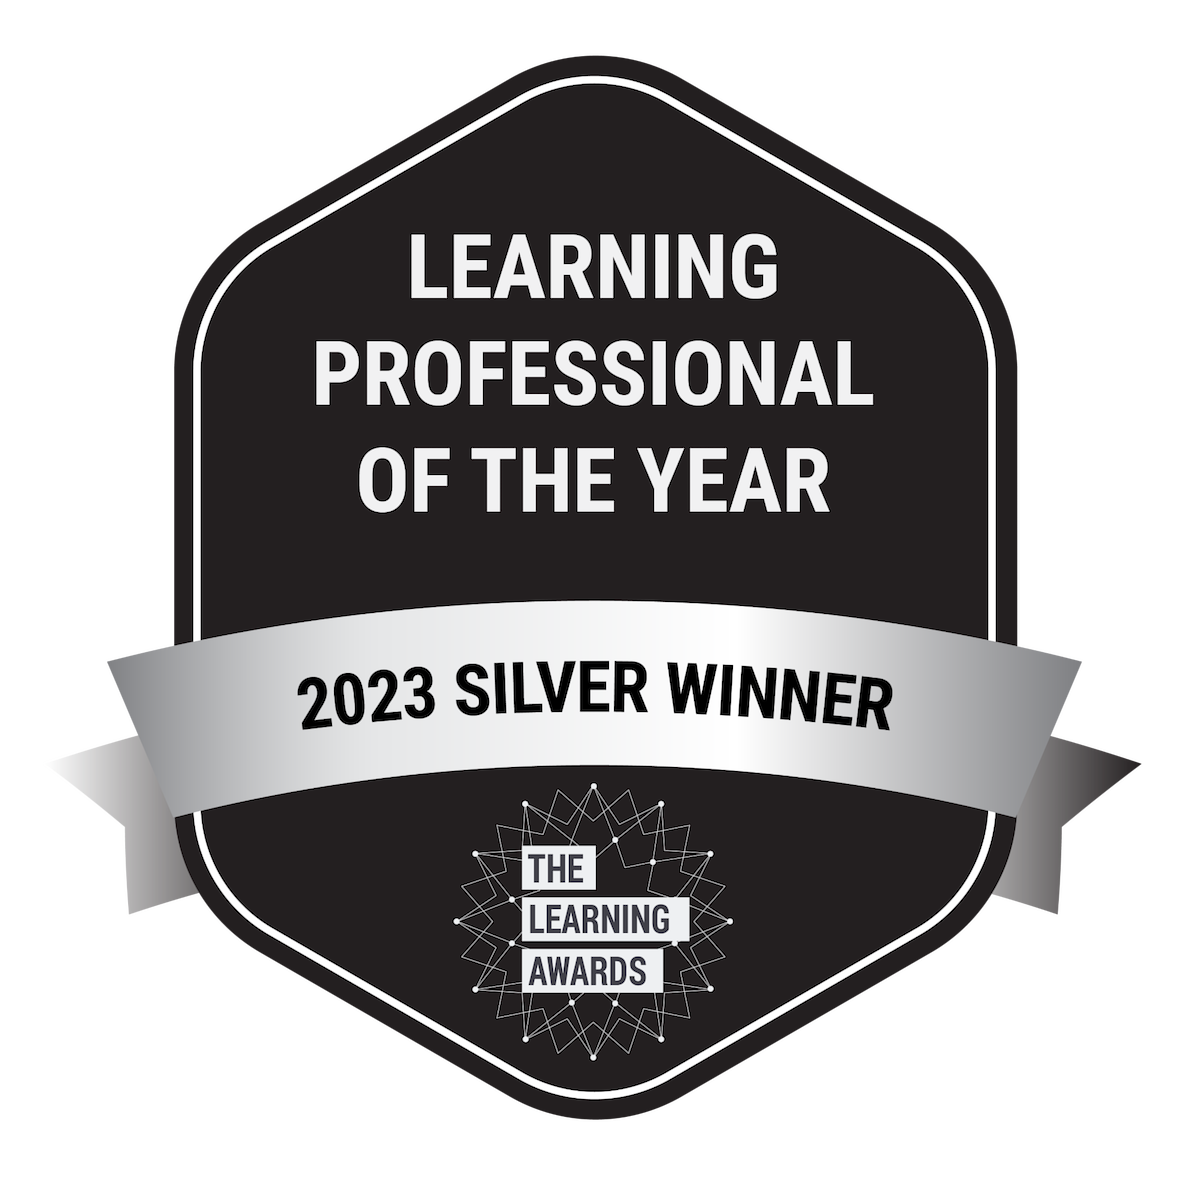 Learning Professional of the Year 2023 Silver Winner Badge